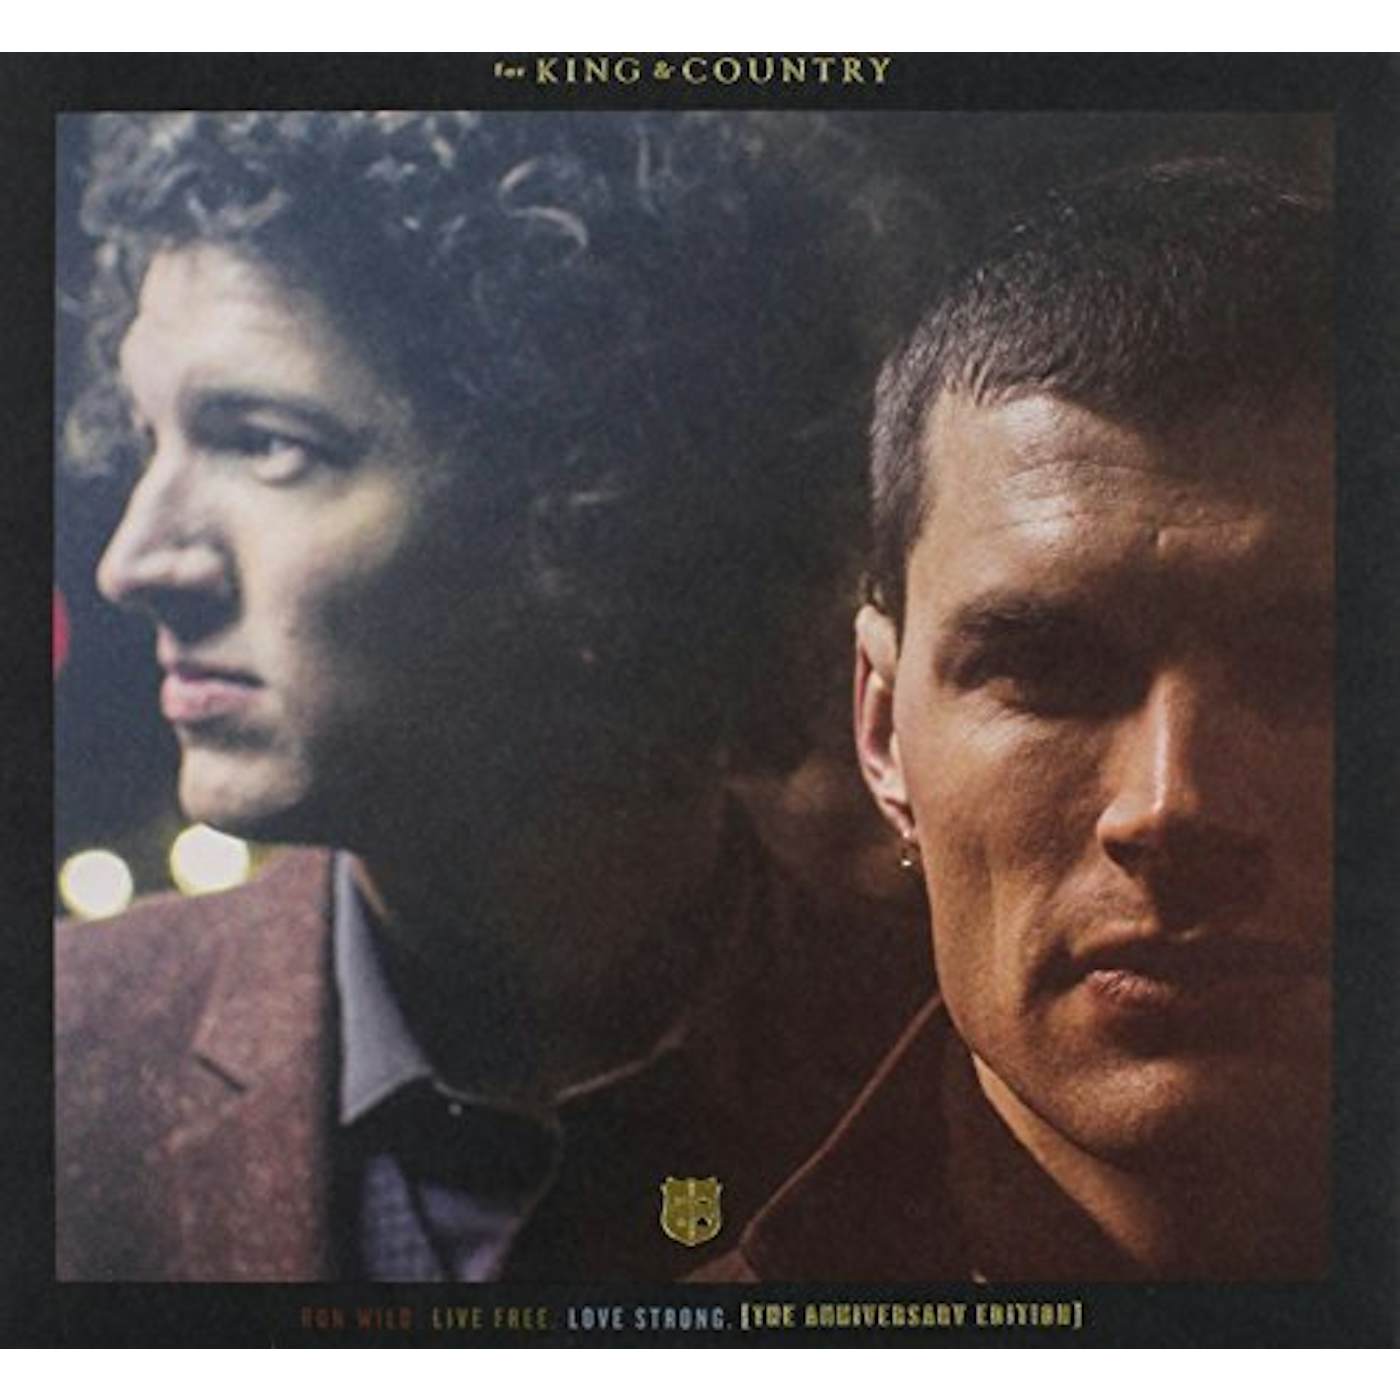 for KING & COUNTRY RUN WILD LIVE FREE LOVE STRONG (AMERICAN EDITION) CD